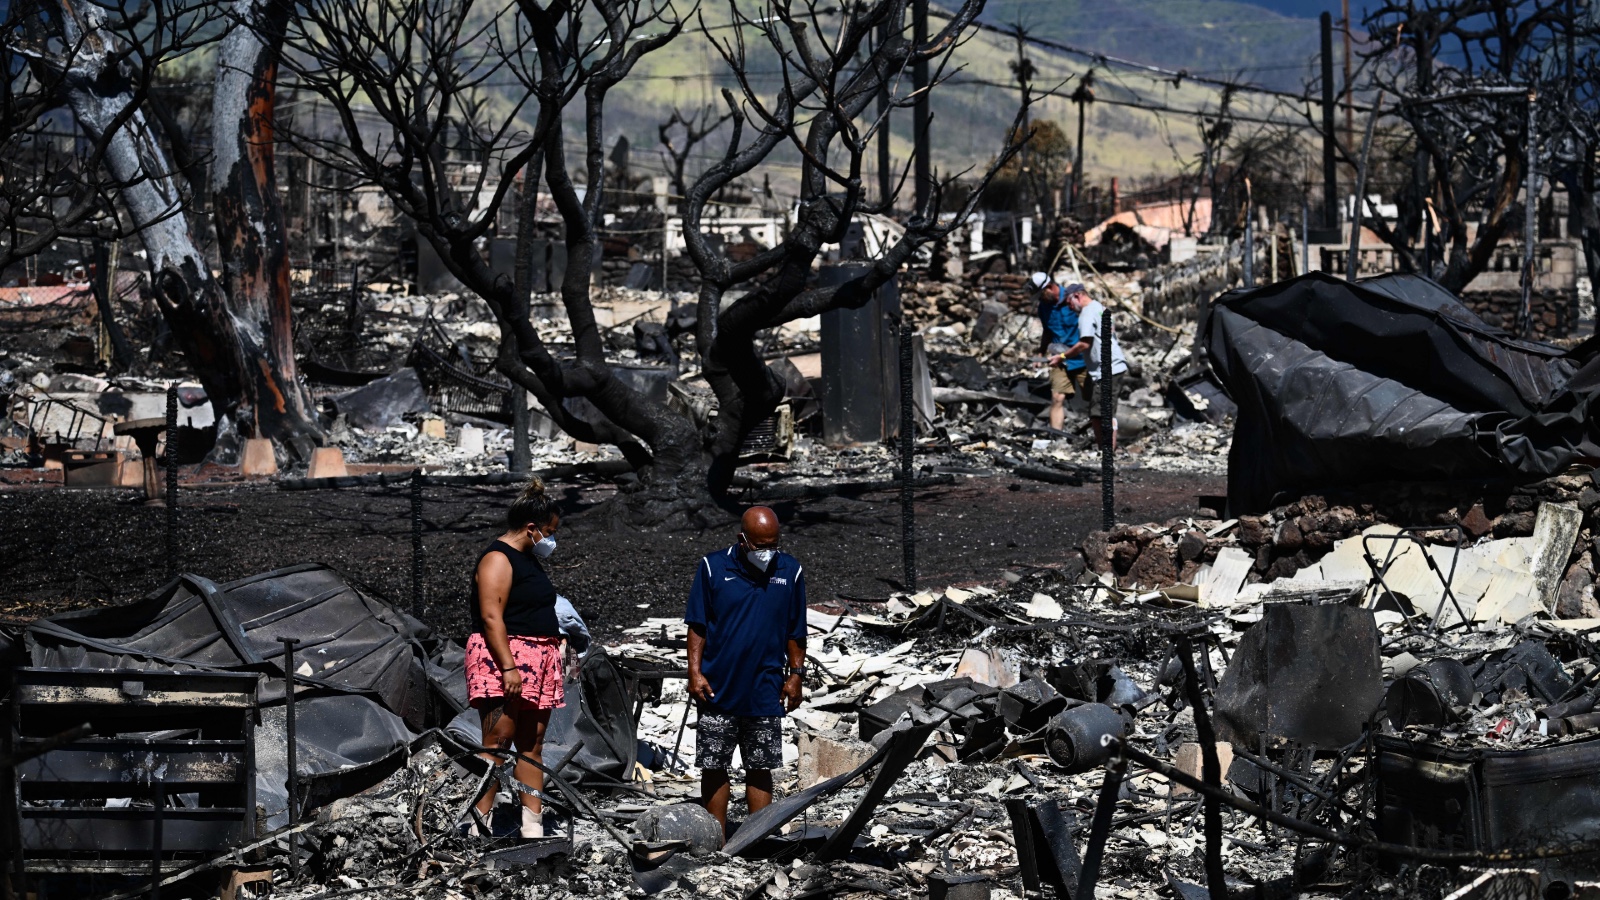 Two survivors search for belongings in wreckage in the historic town of Lahaina after wildfires broke out across Maui.